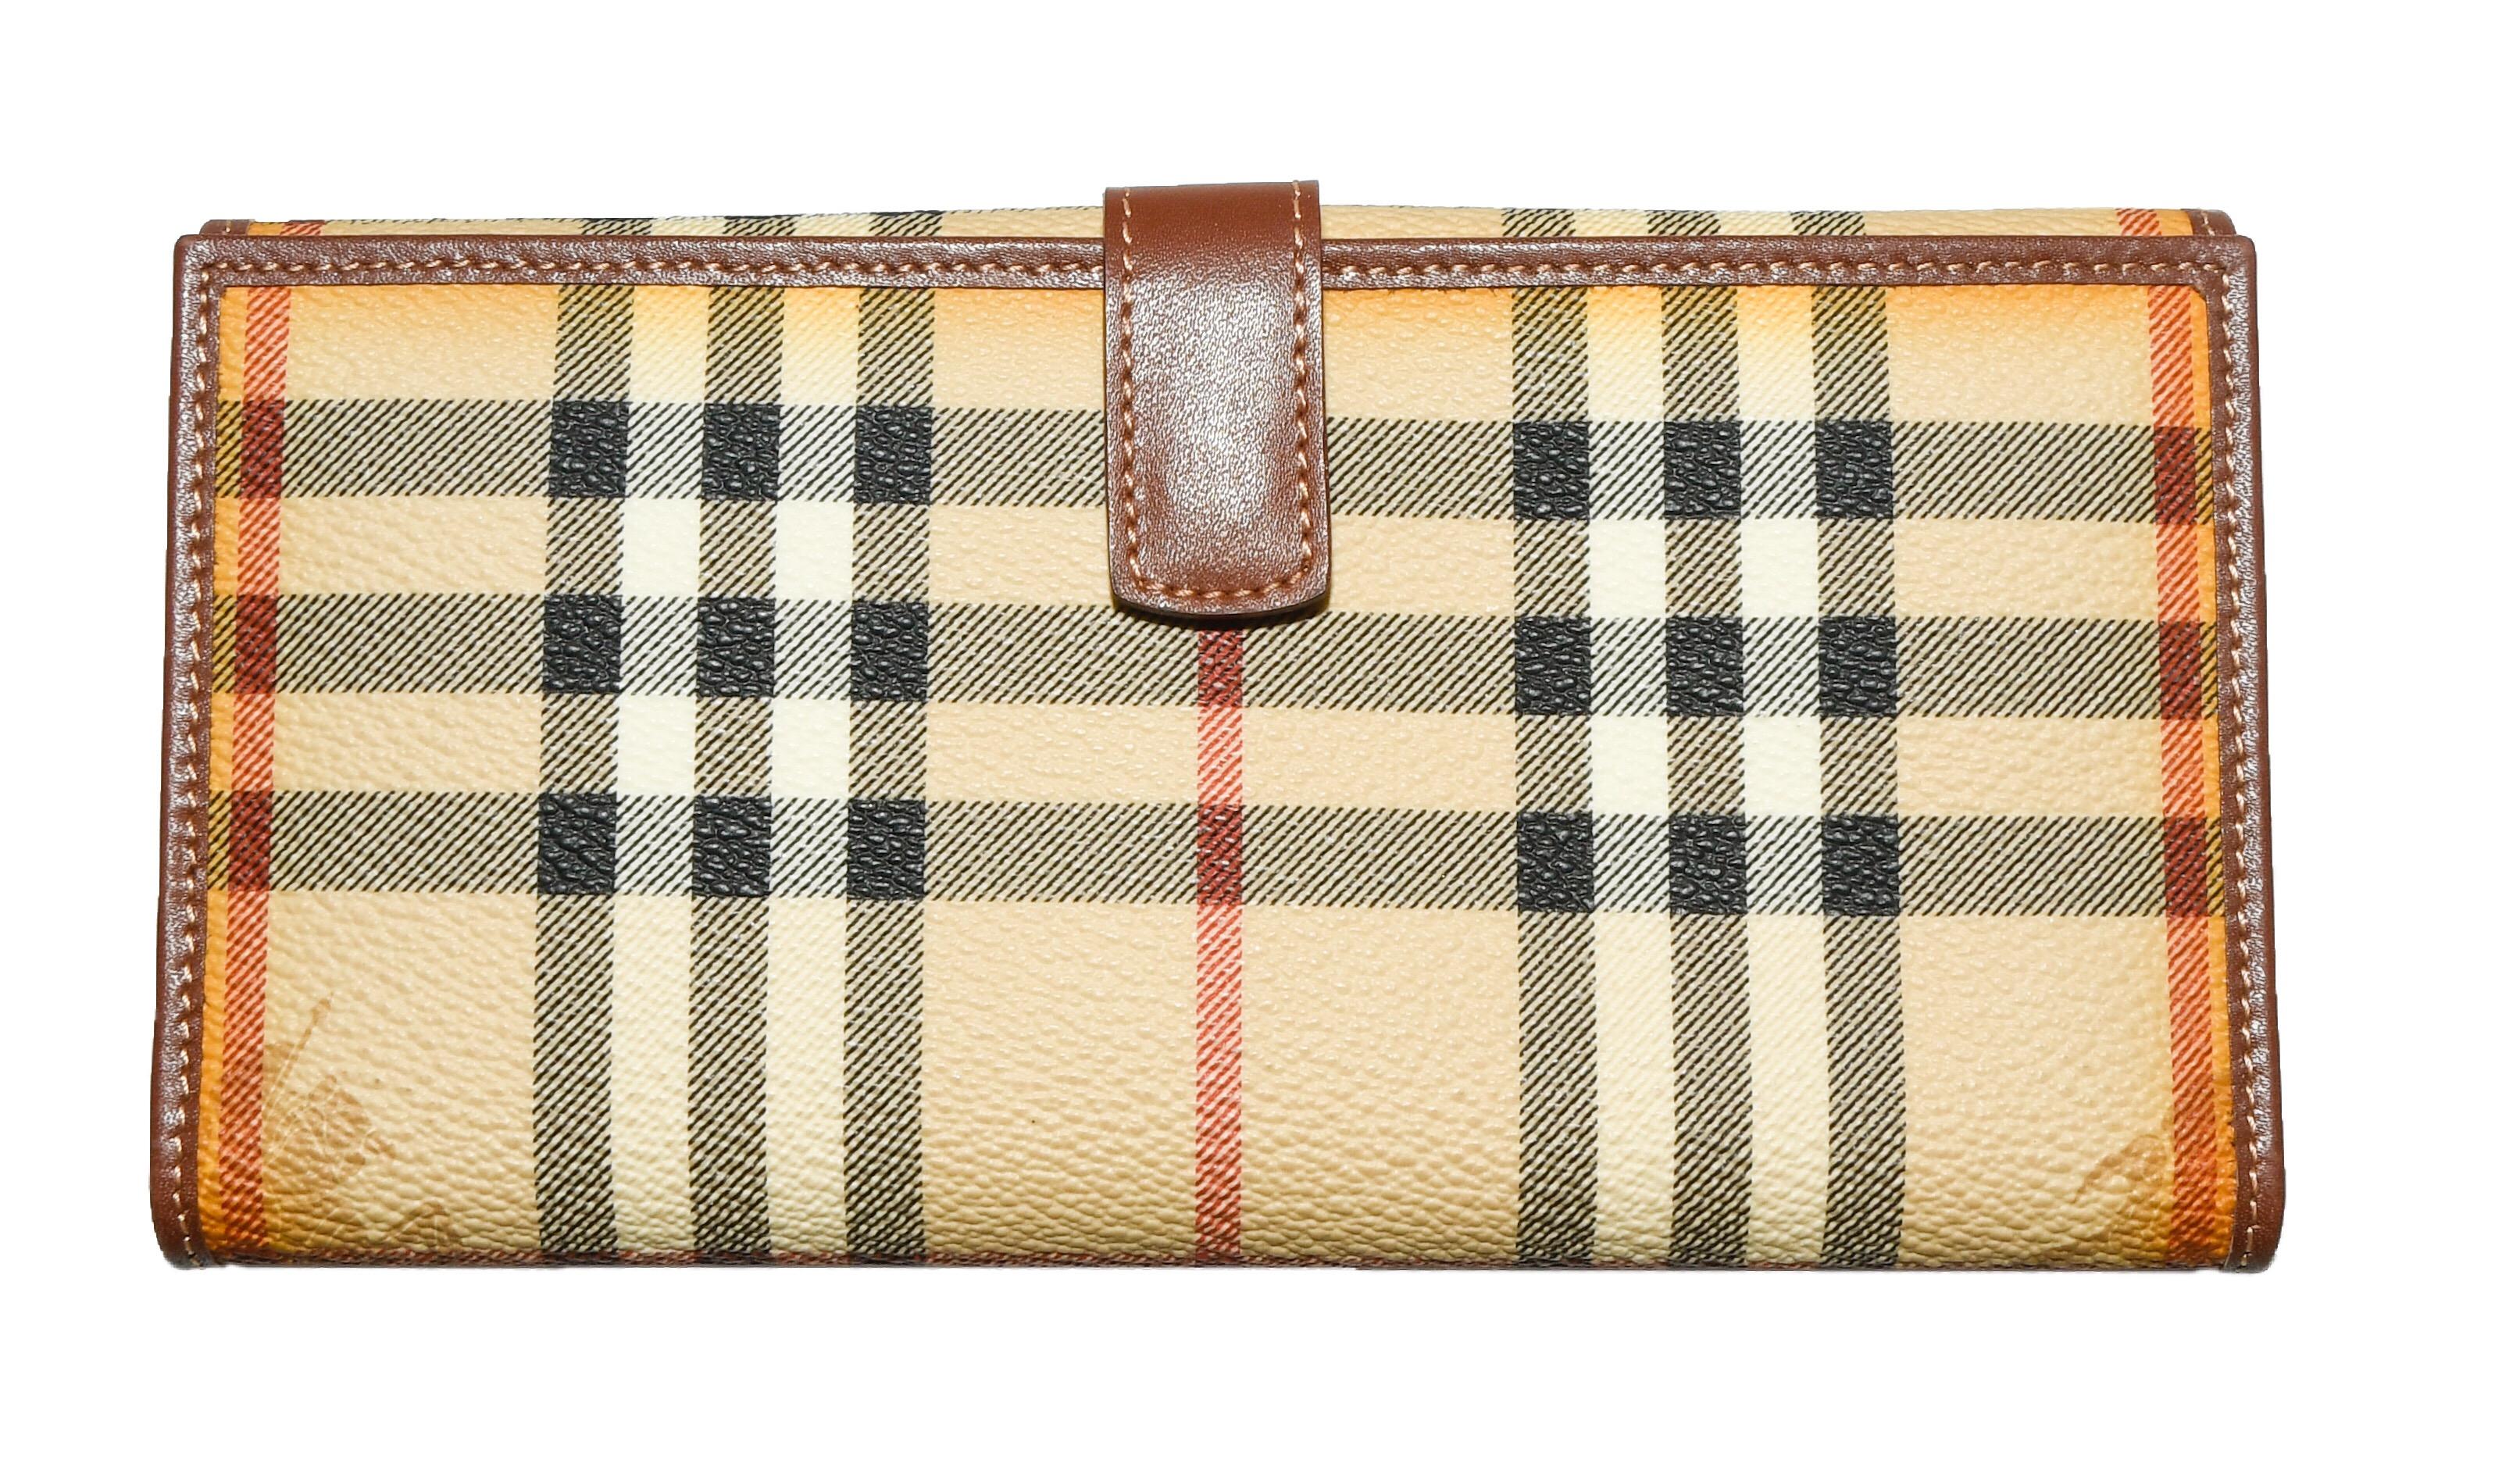 Burberry luxurious addition to your accessories repertoire, the Burberry Prorsum vintage wallet is designed in the label's signature House plaid check in a nod to its rich British heritage.   This wallet can hold all of your essentials, it boasts